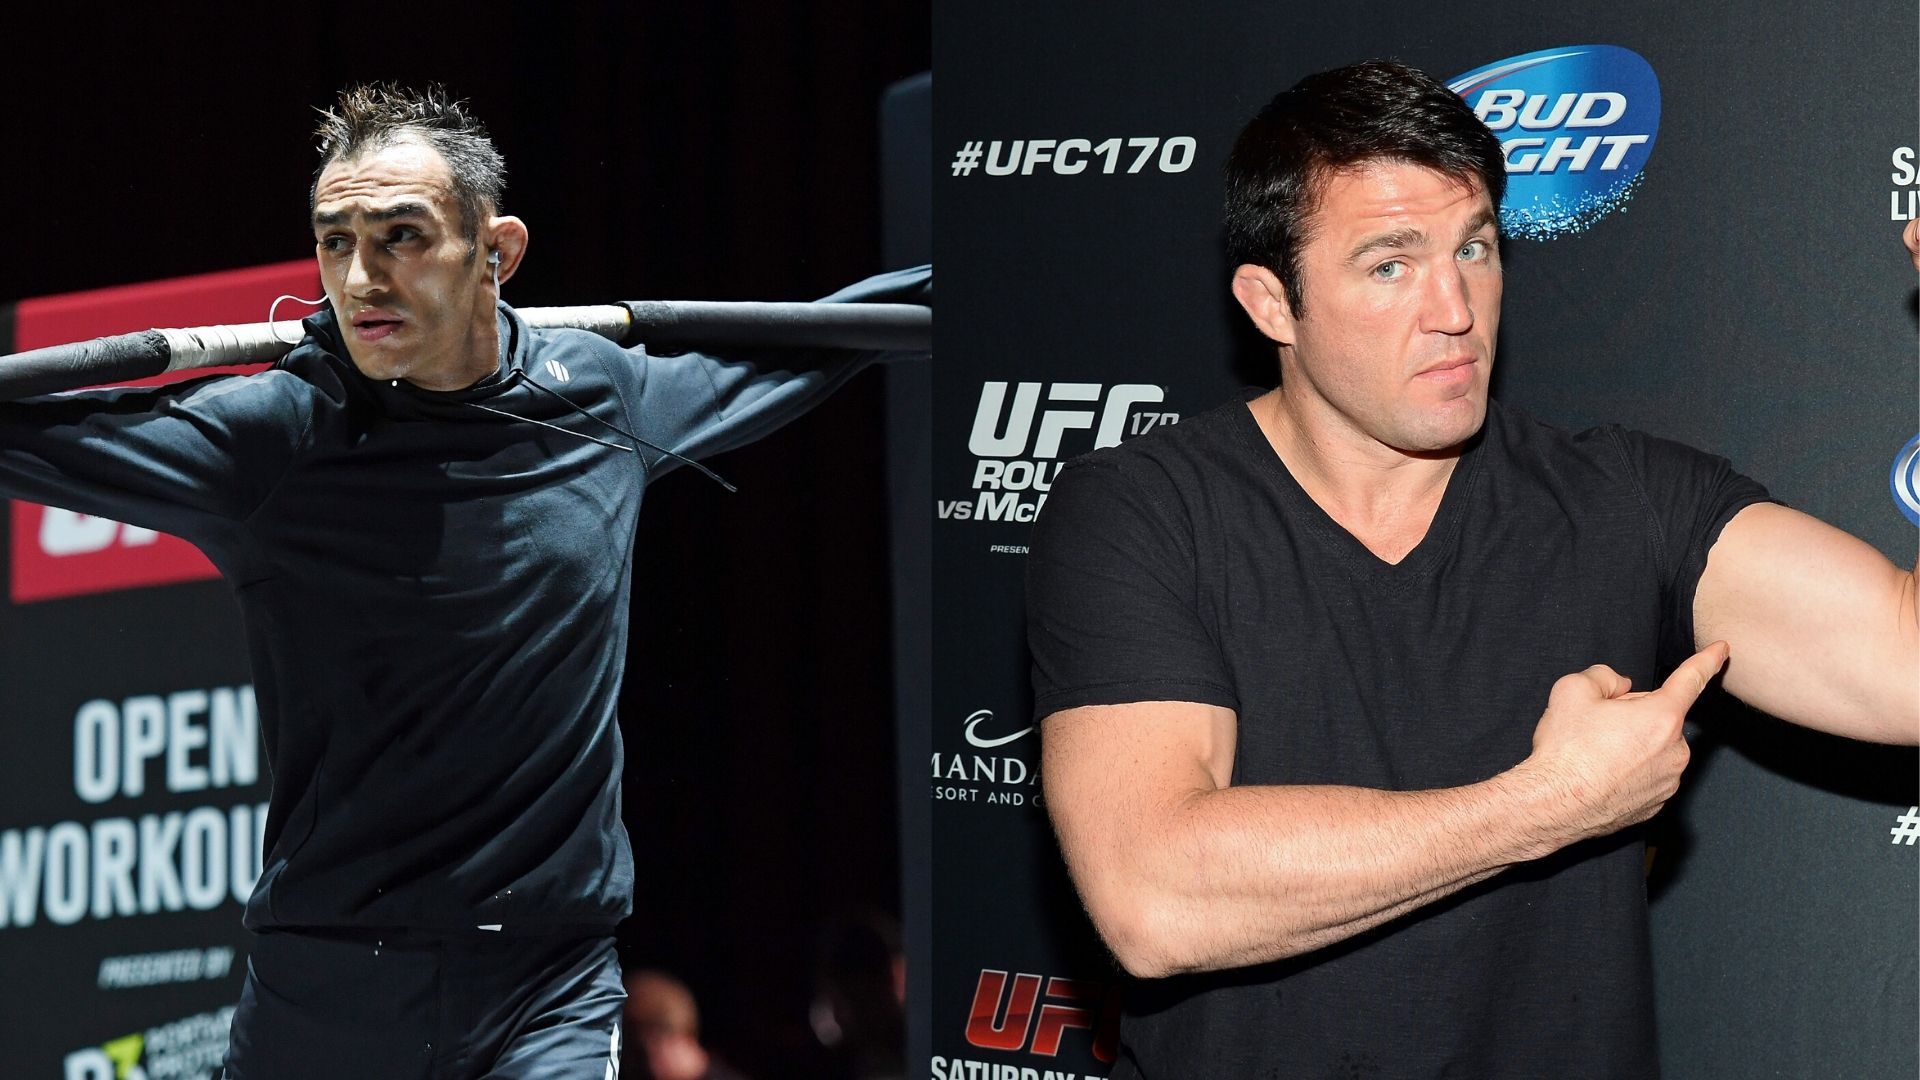 Tony Ferguson is known for his crazy workout videos, something that Chael Sonnen touched upon